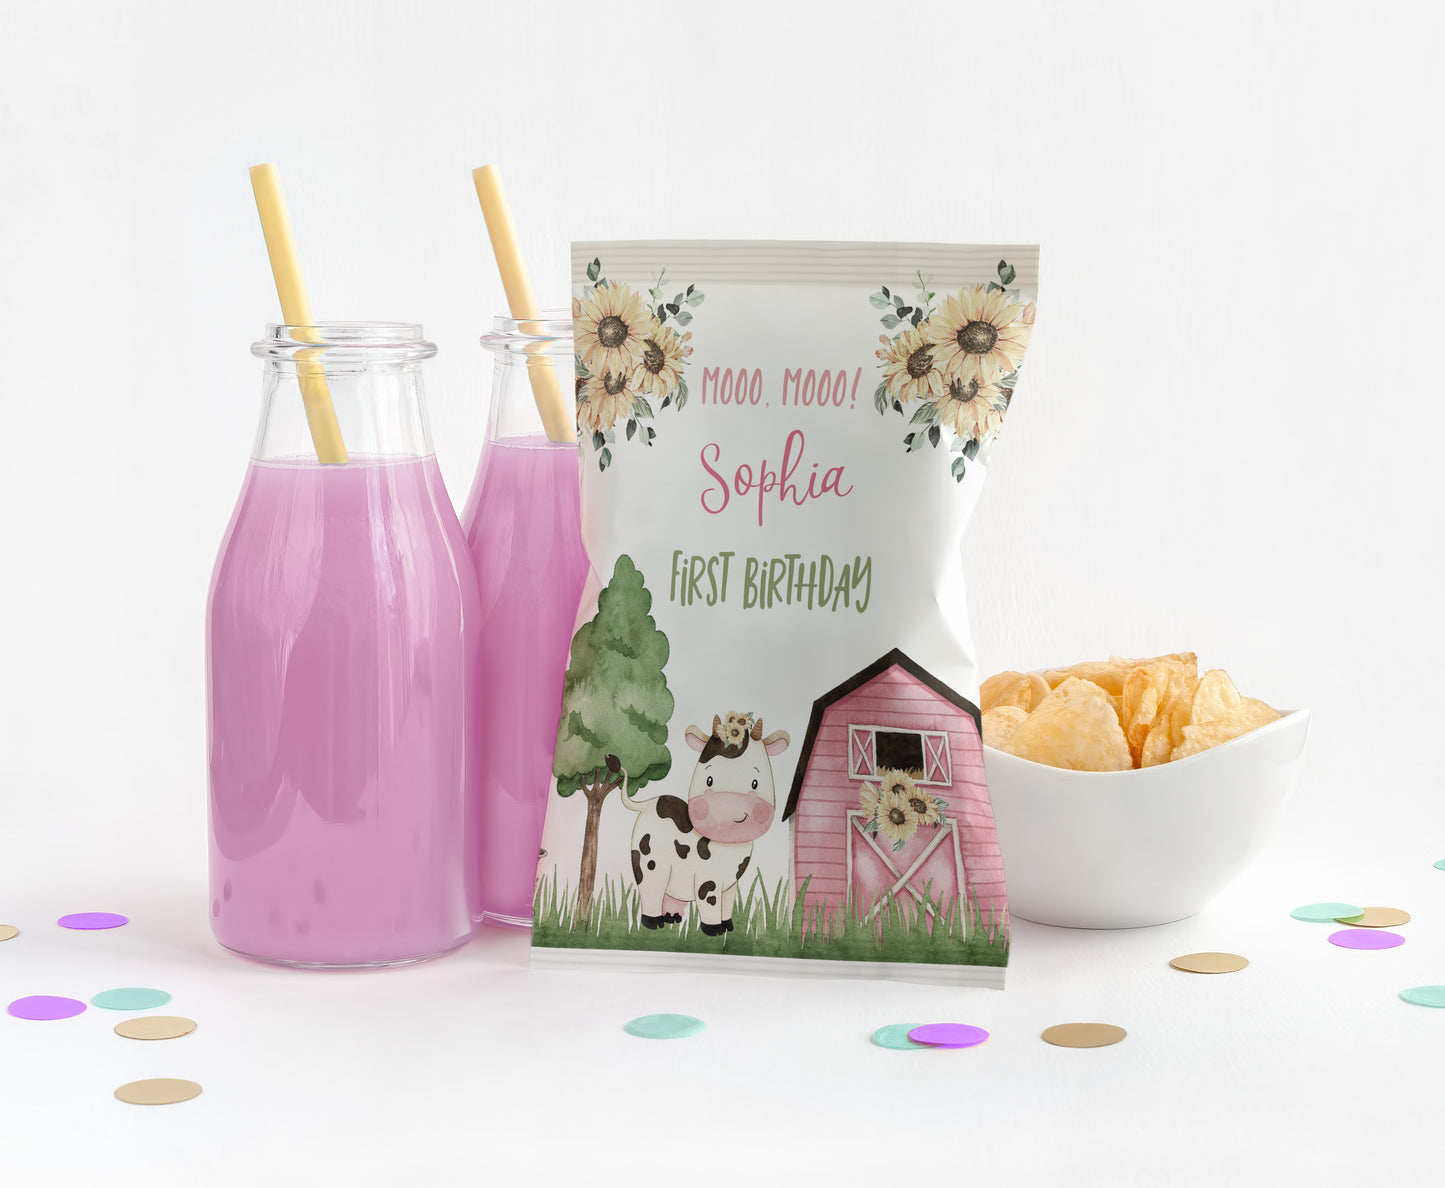 Editable Sunflower Cow Chip Bag Wrapper | FlorAL Farm Theme Birthday Party Decorations - 11G